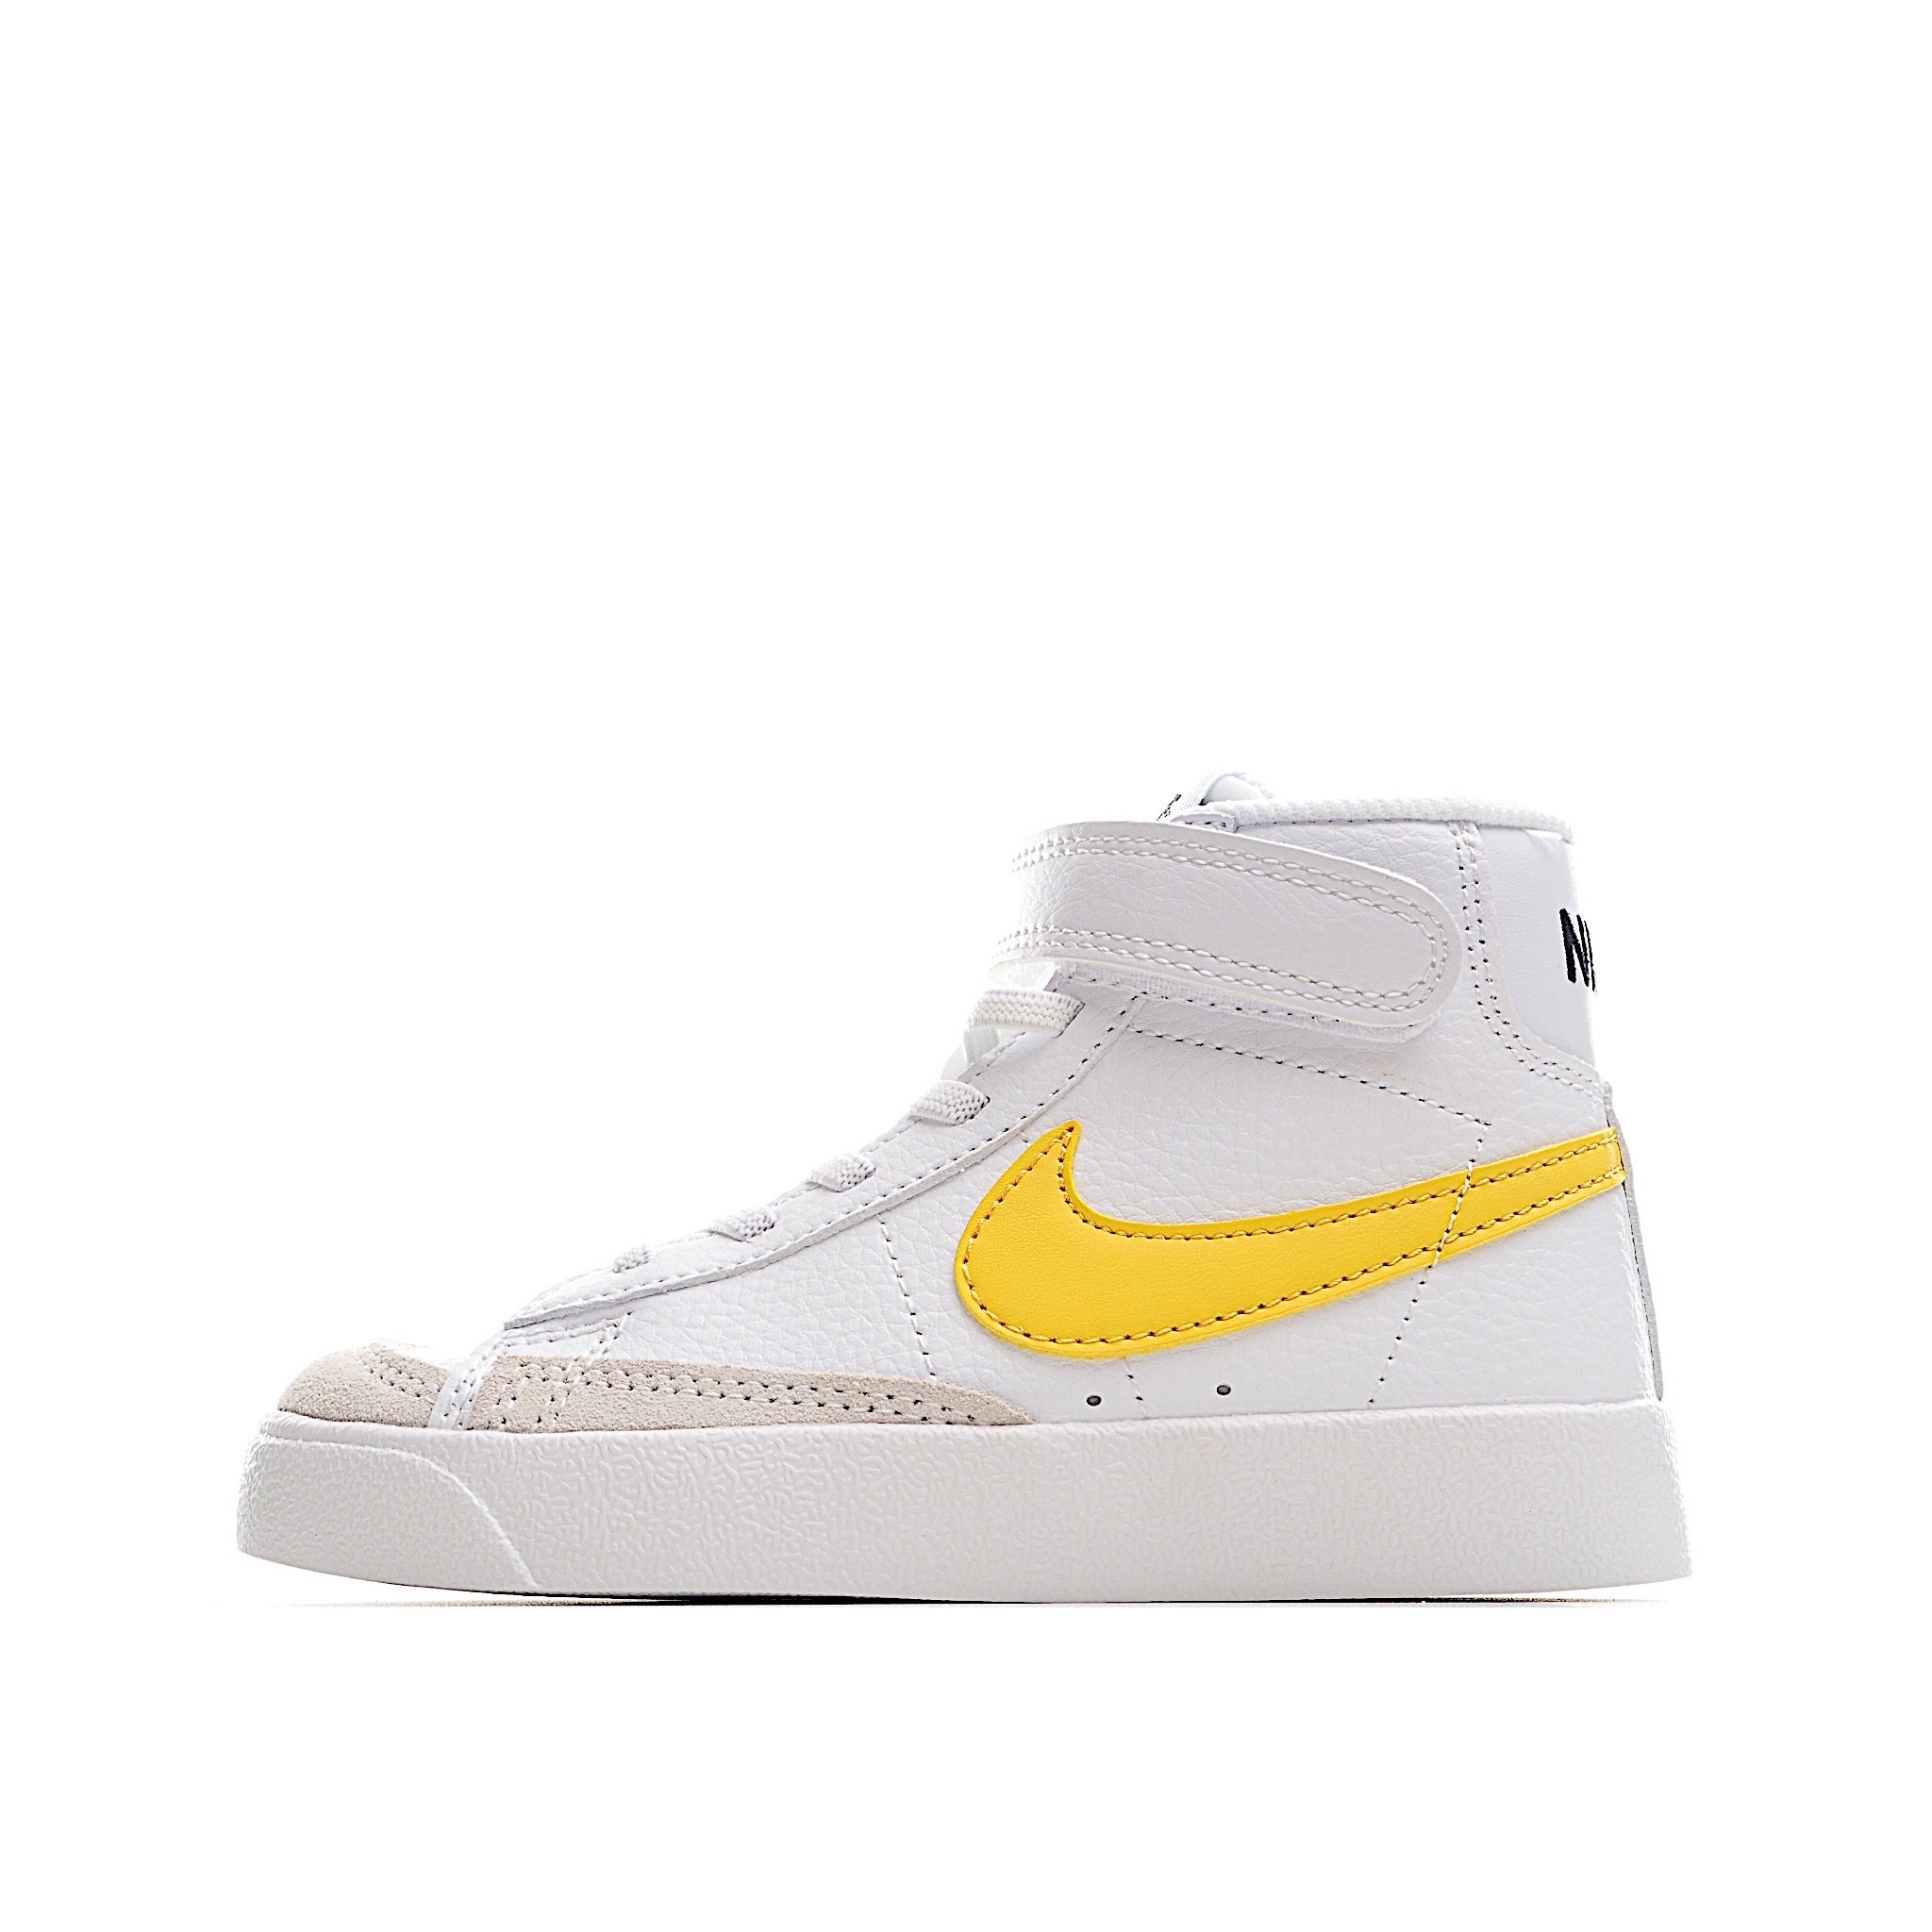 Nike high blazer yellow and brown shoes